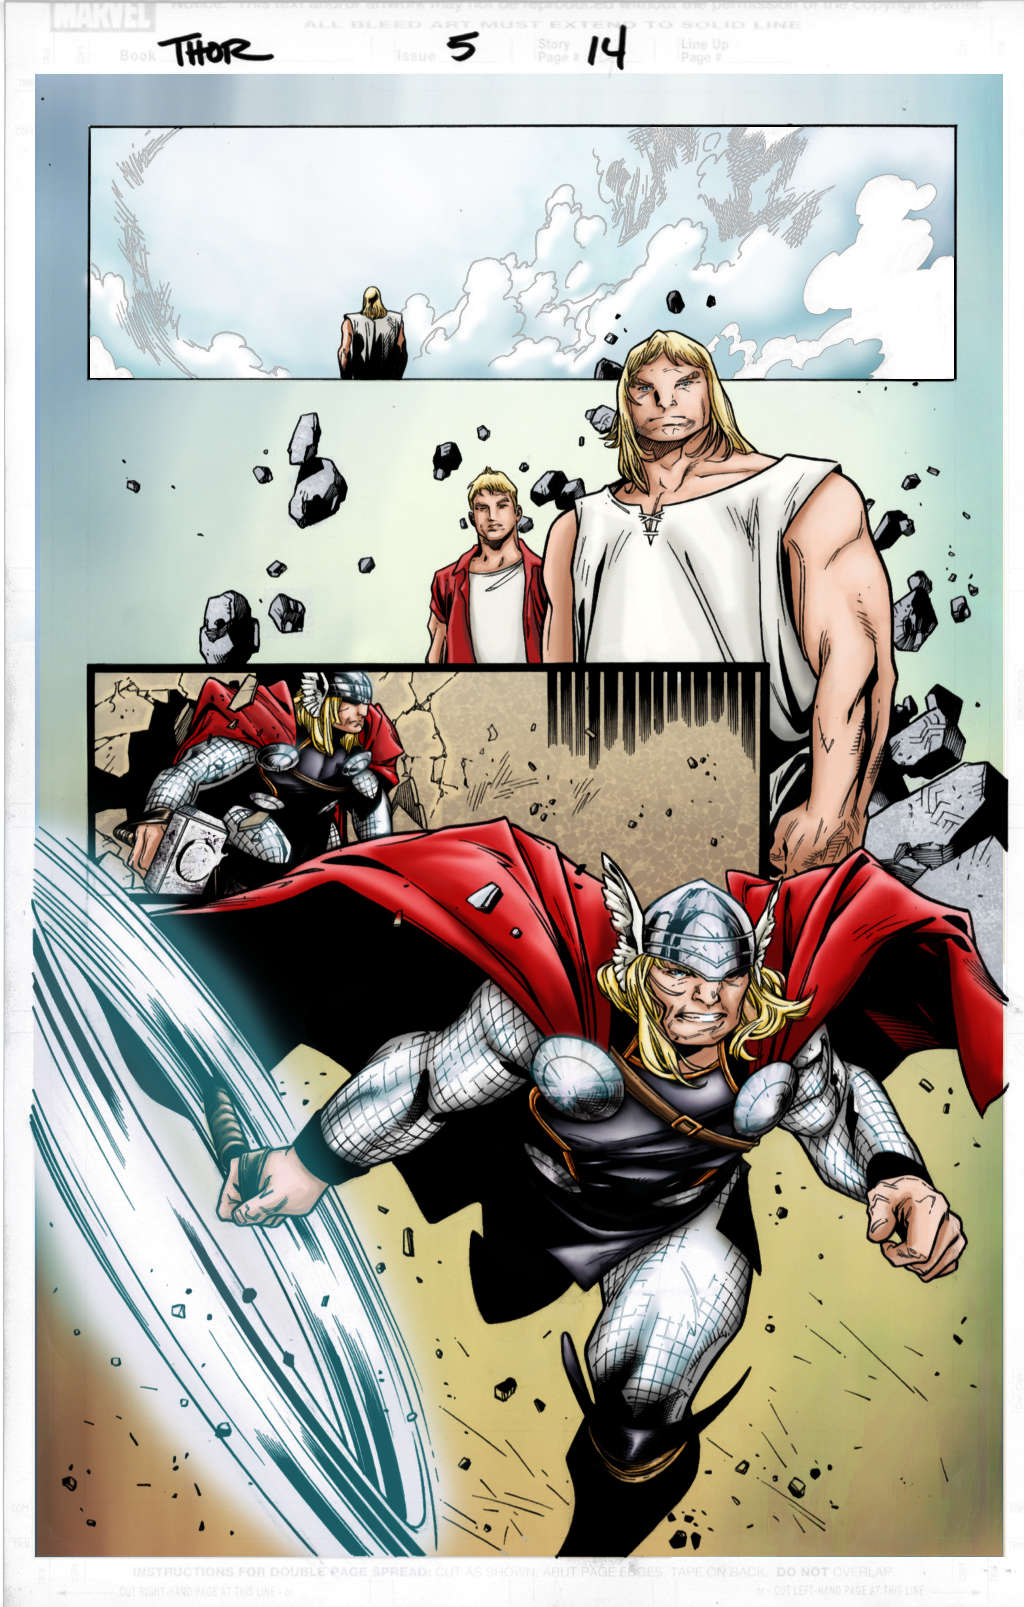 Thor issue 5 page 13 version 2